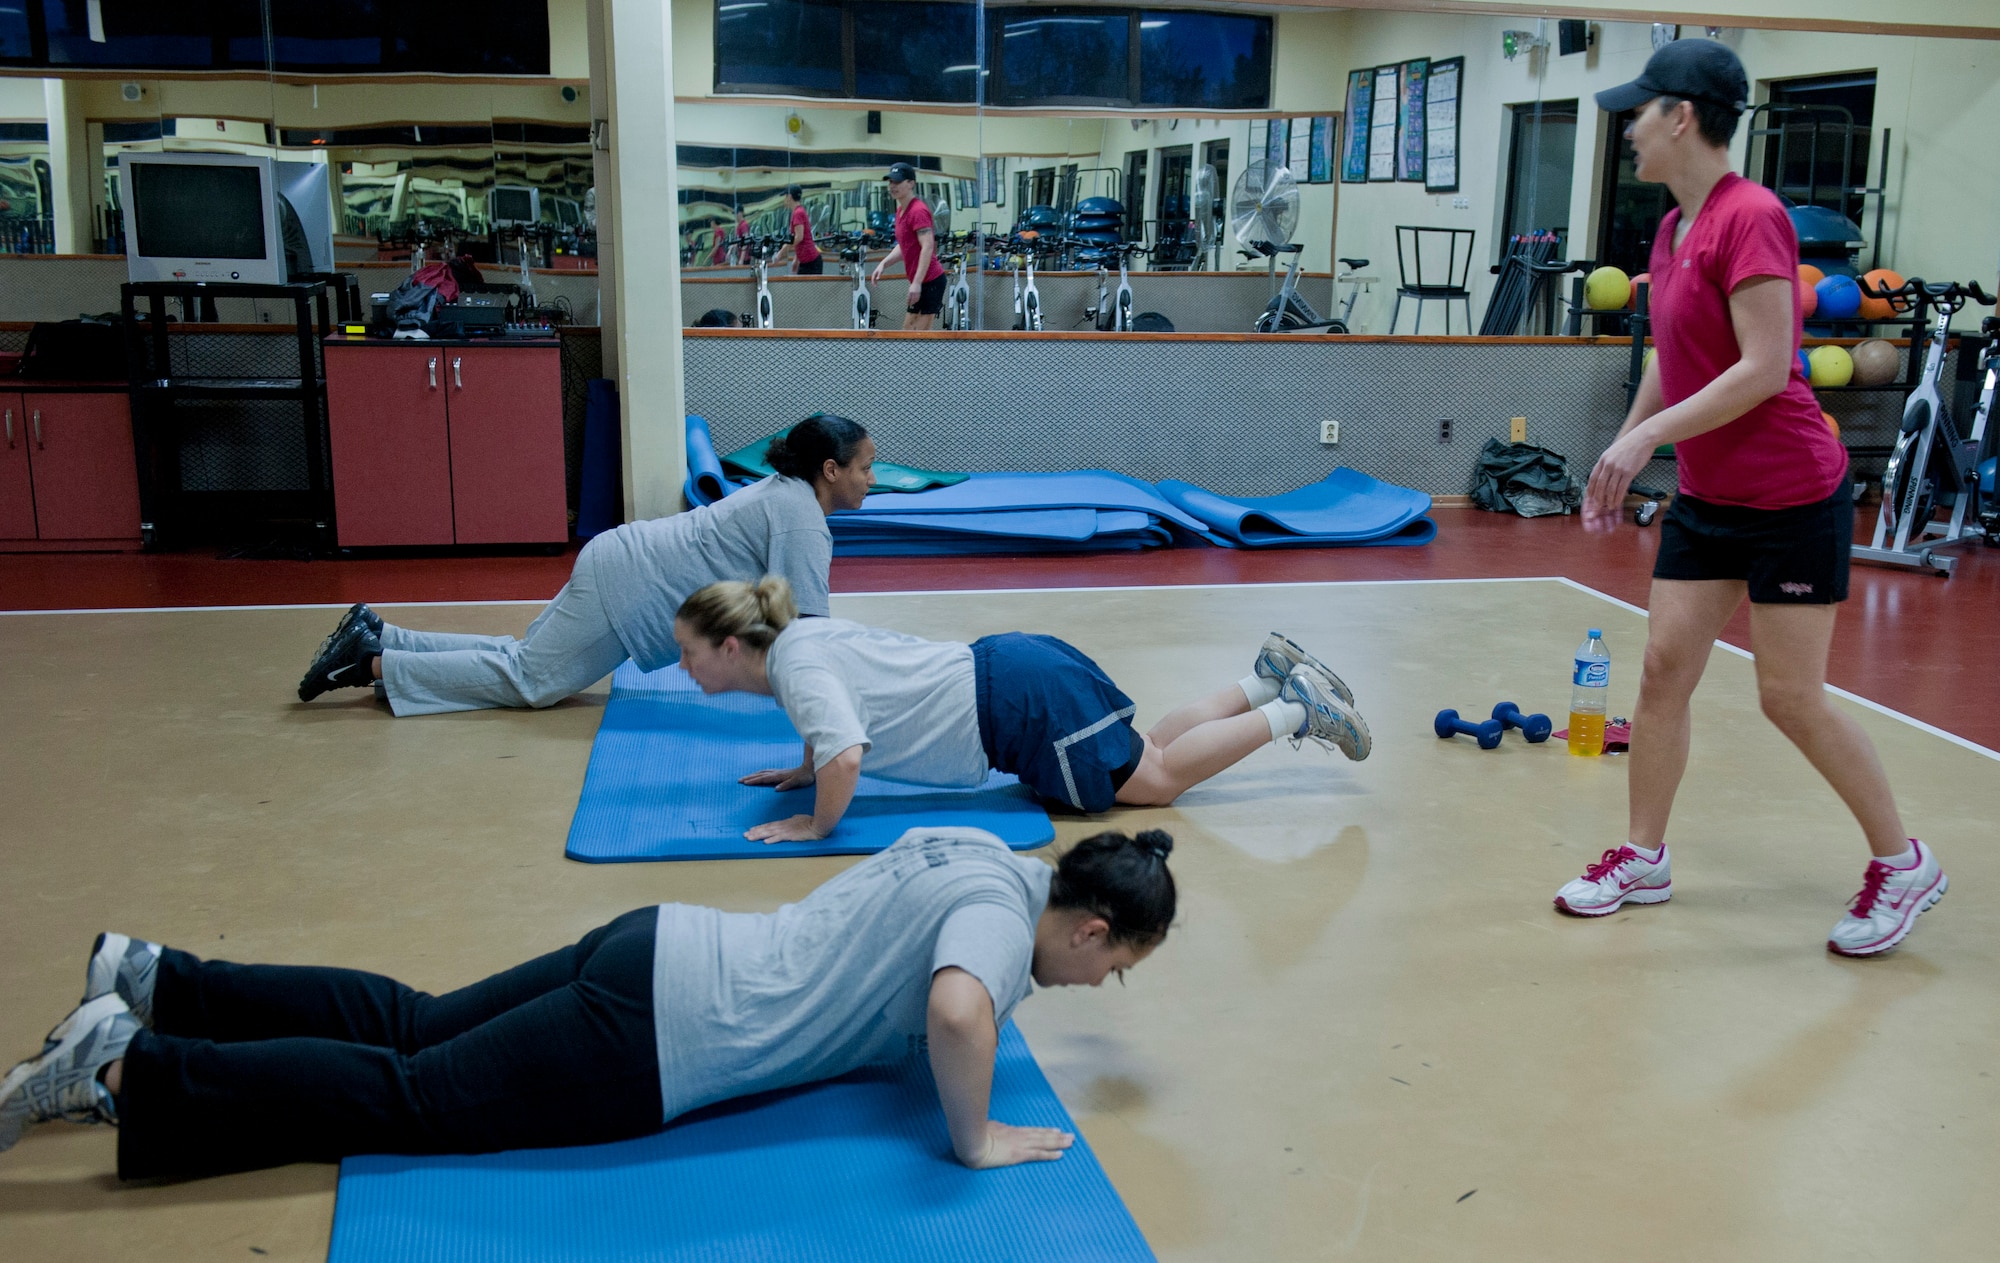 Bobbi Cervantez, Health and Wellness Center exercise physiologist, right, teaches a fitness class designed to help pregnant women stay fit during their pregnancy Feb. 17, 2012, at Incirlik Air Base, Turkey. With more than 20 pregnant active-duty members and several spouses at Incirlik, organized pregnancy PT is a welcome resource. According to Air Force Instruction 10-248, AF Fitness Program, pregnant Airmen are required to participate in physical activity throughout their pregnancy, if cleared by a physician. (U.S. Air Force photo by Senior Airman Anthony Sanchelli/Released)
